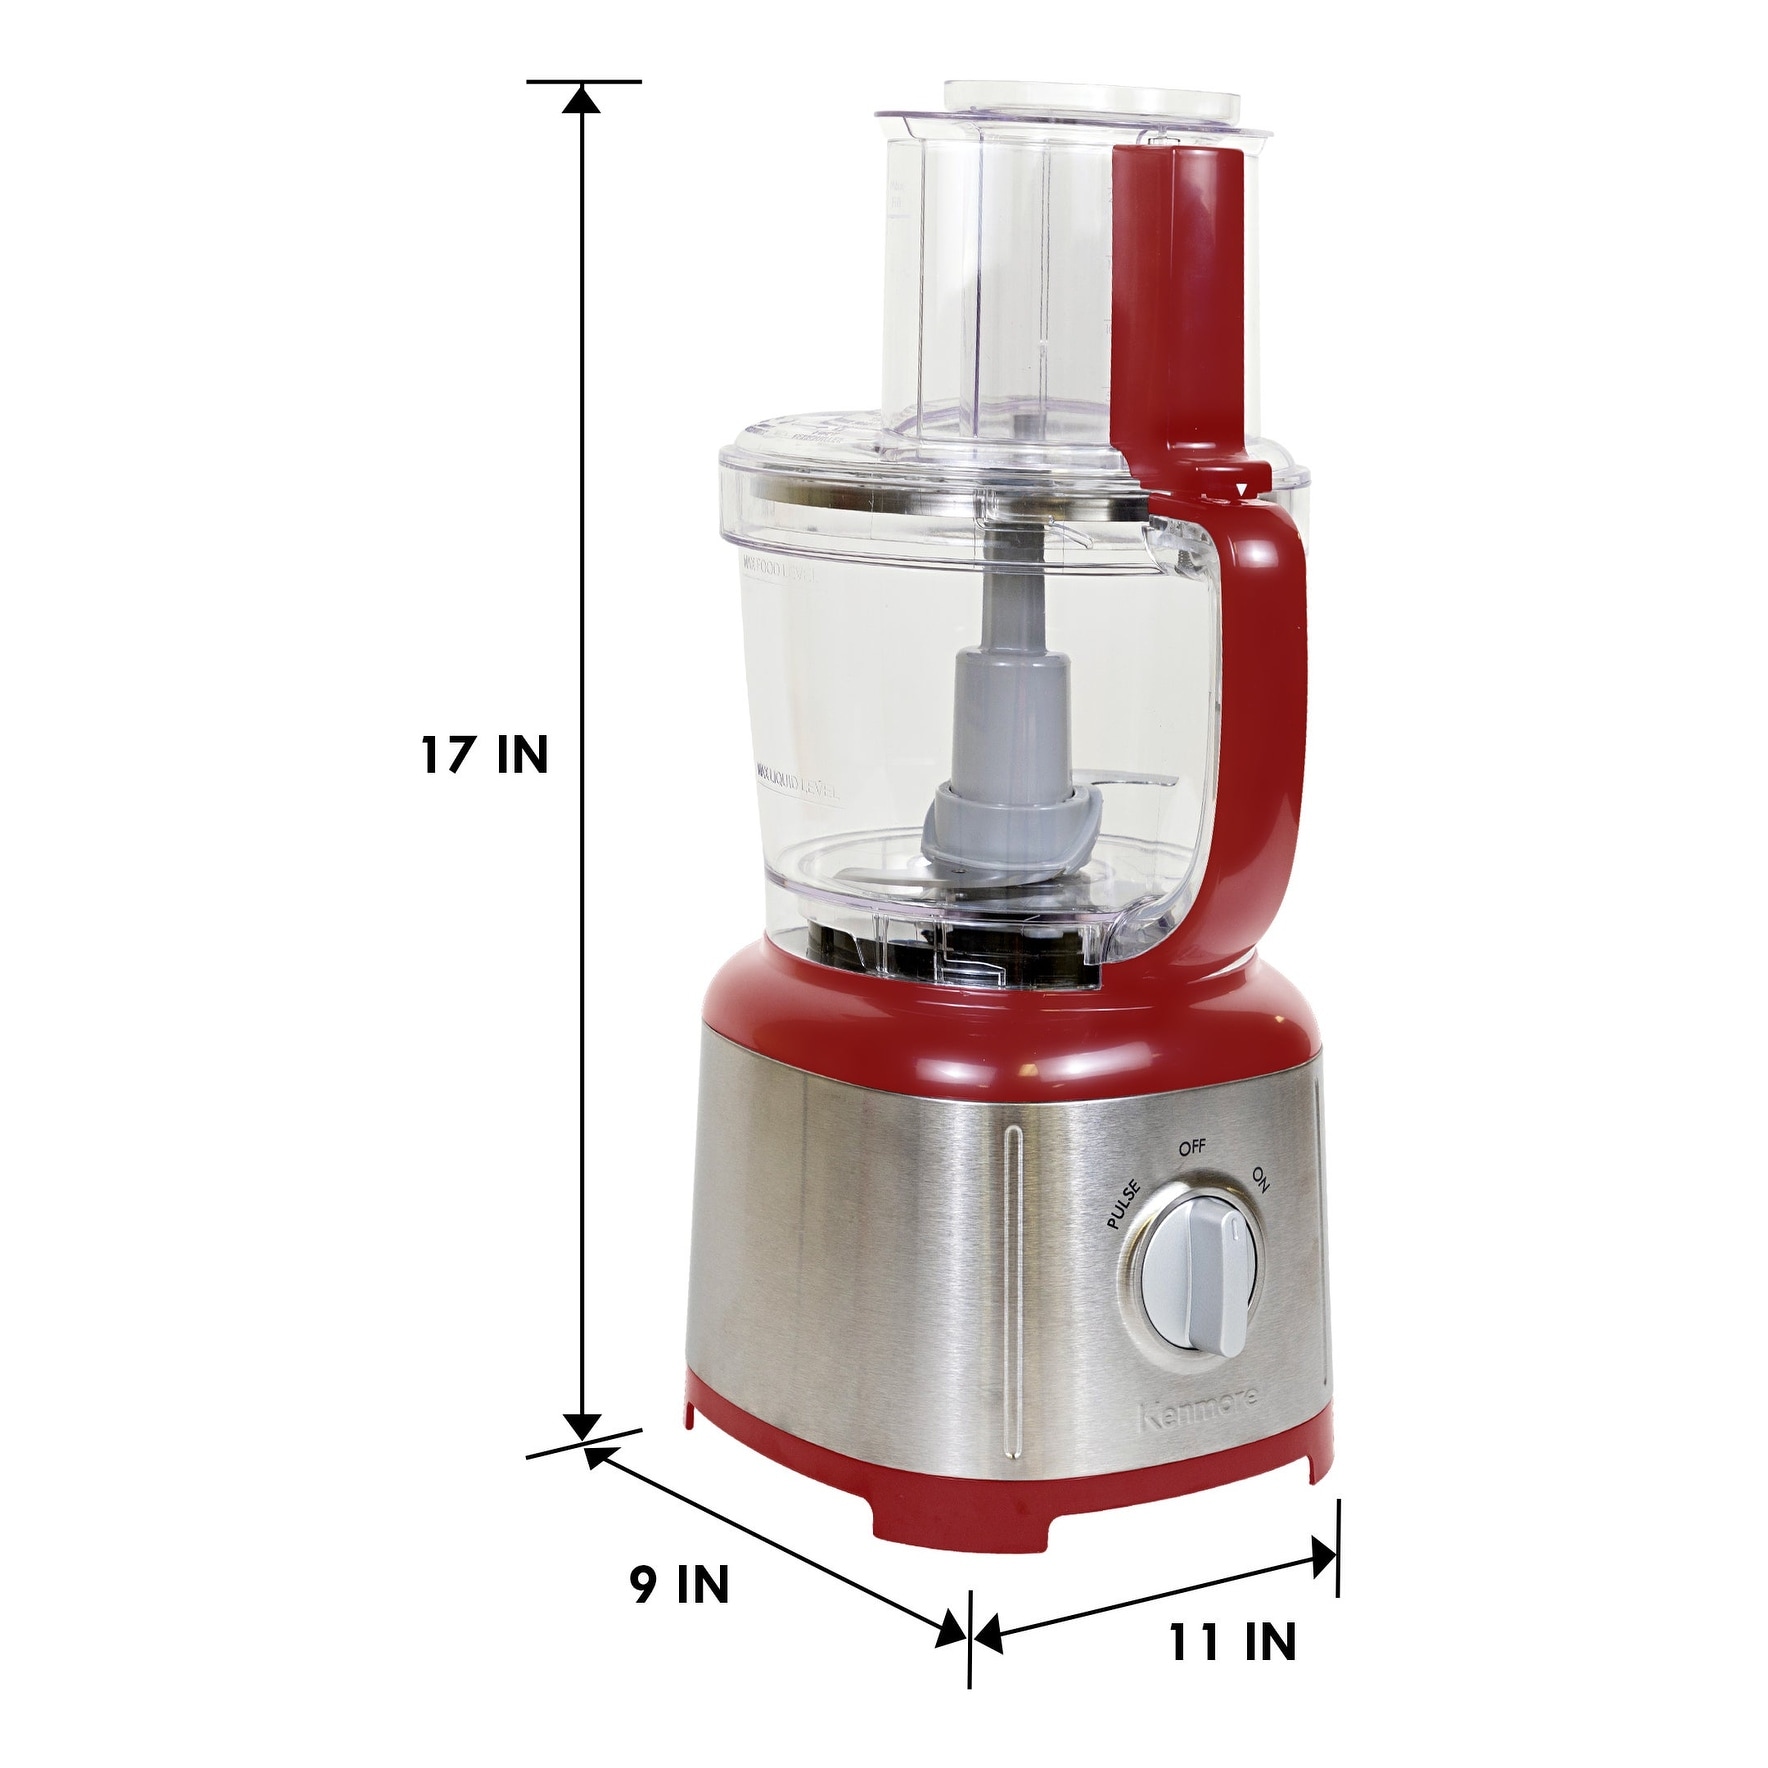 https://ak1.ostkcdn.com/images/products/is/images/direct/89fcc5806e8327bf9c00a81a1610e7ac67a61844/Kenmore-11-cup-Food-Processor---Red---414302.jpg